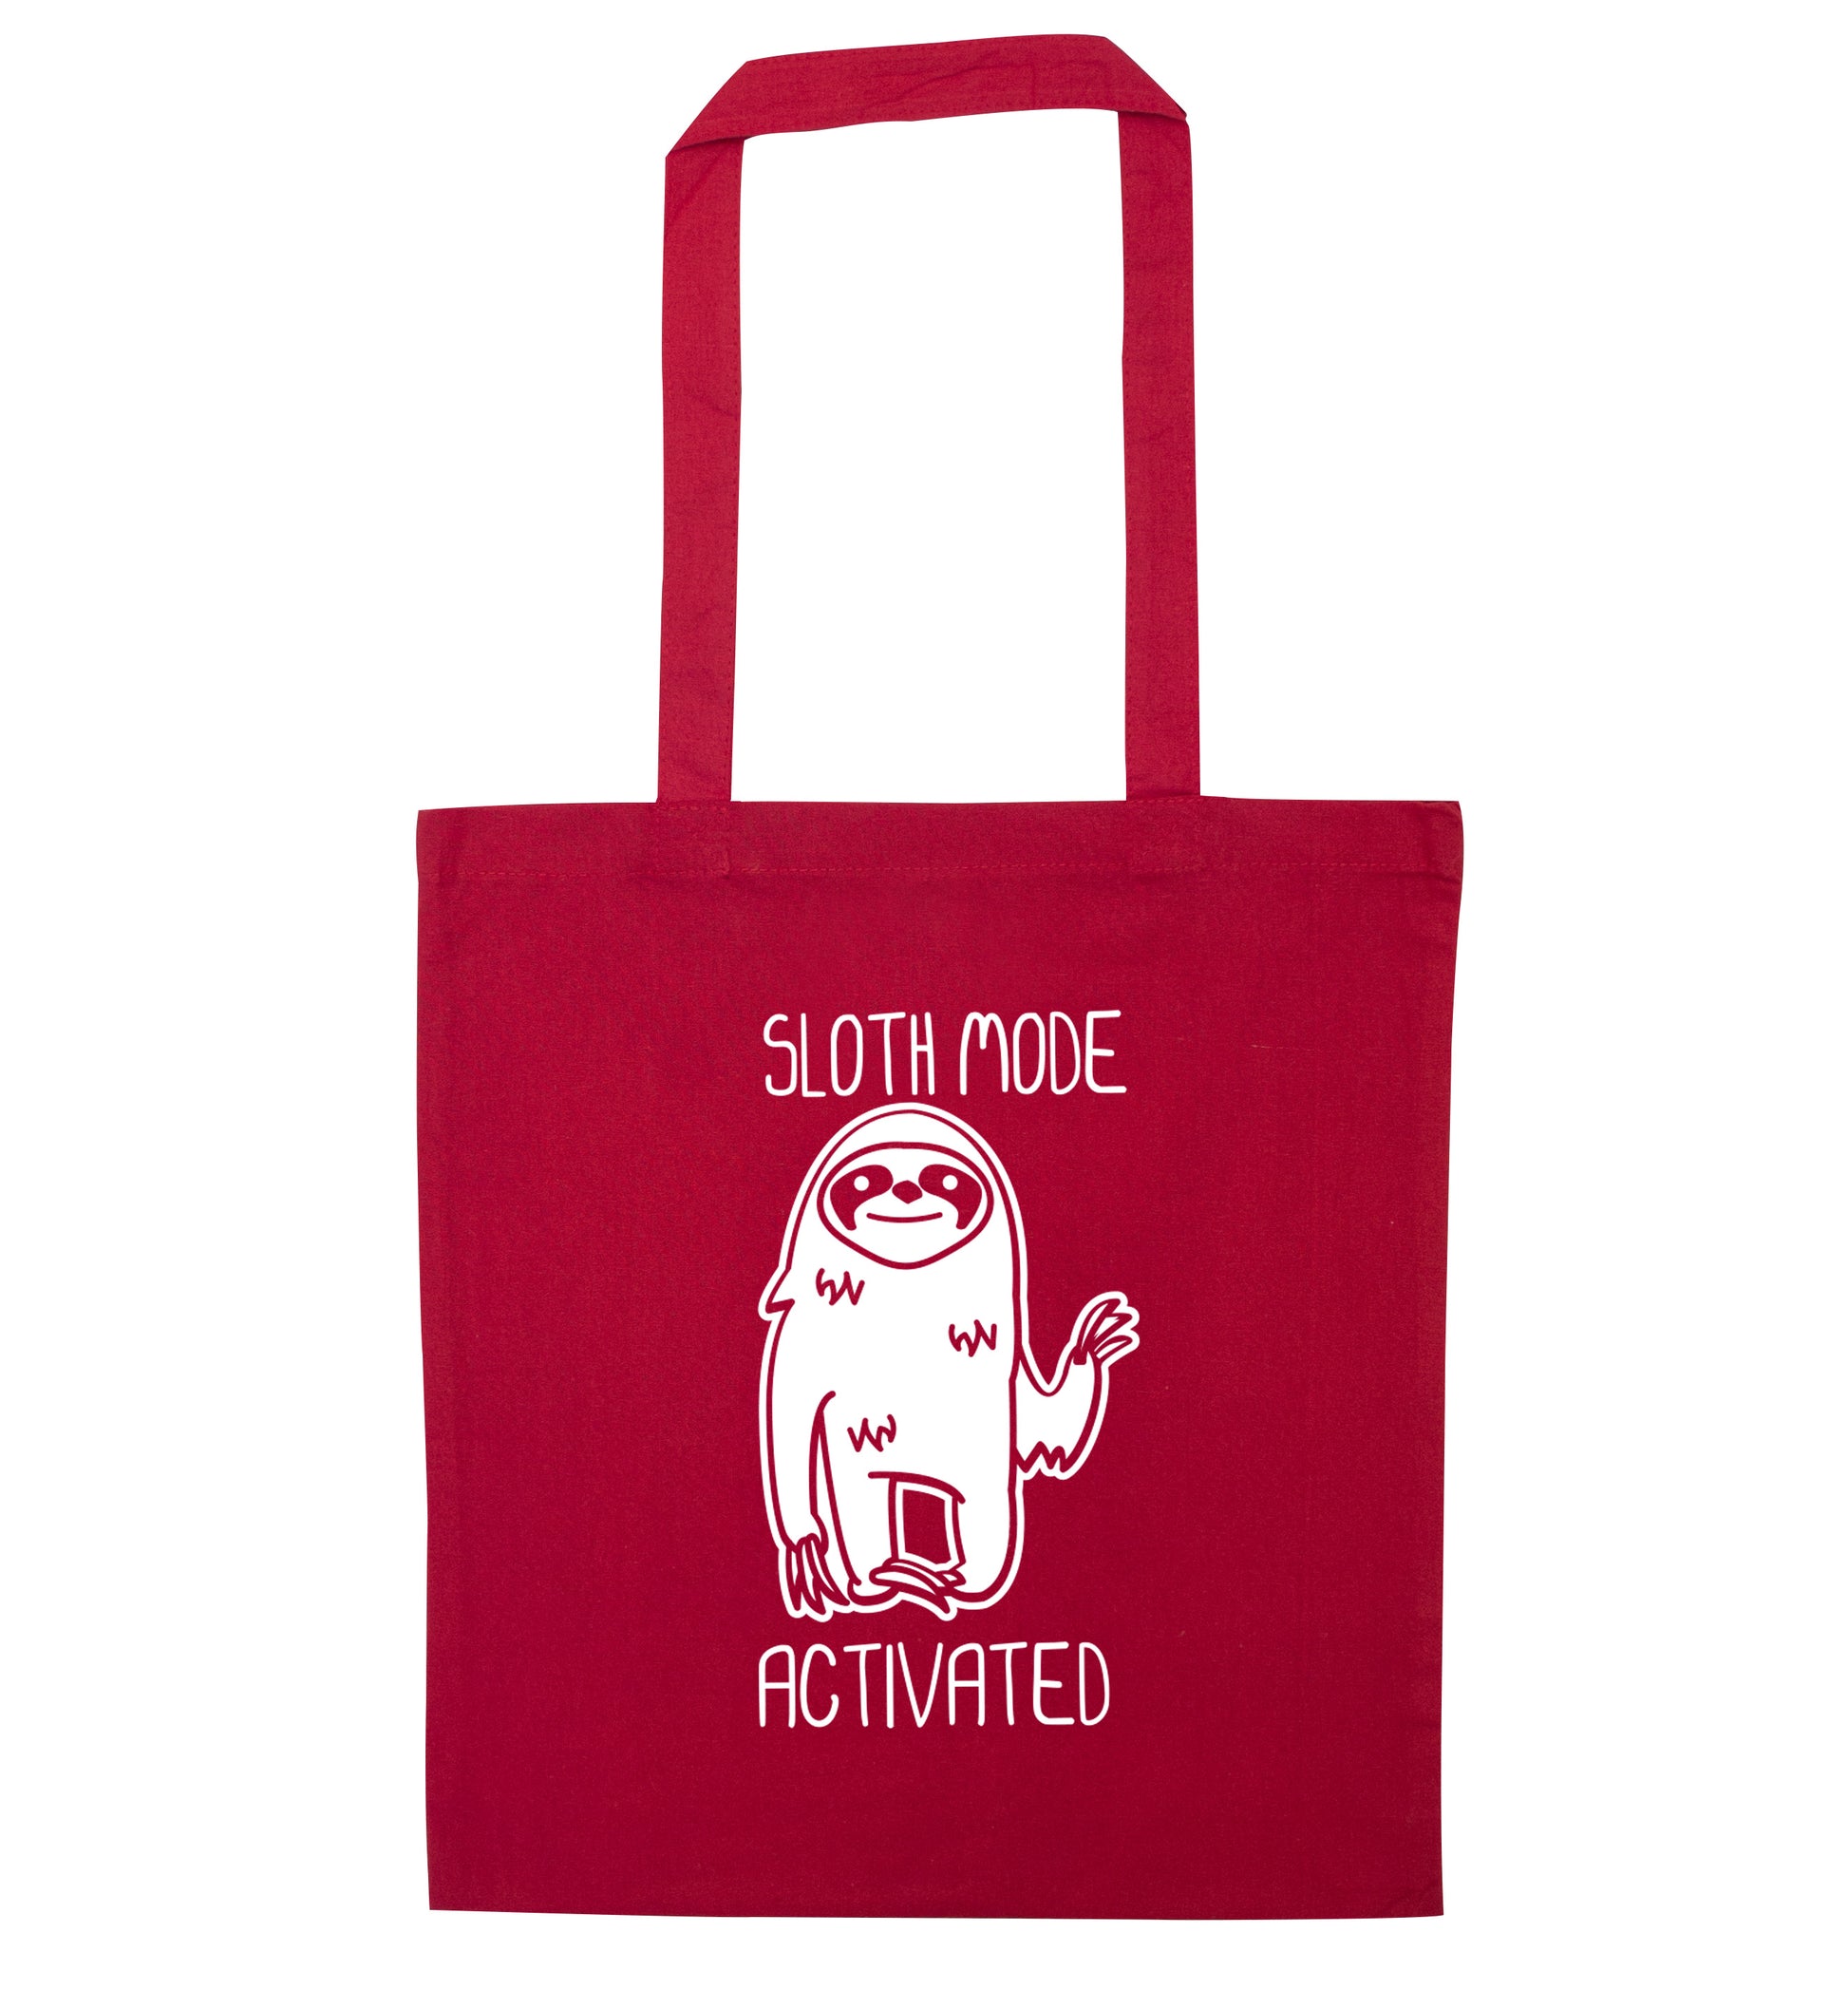 Sloth mode acitvated red tote bag